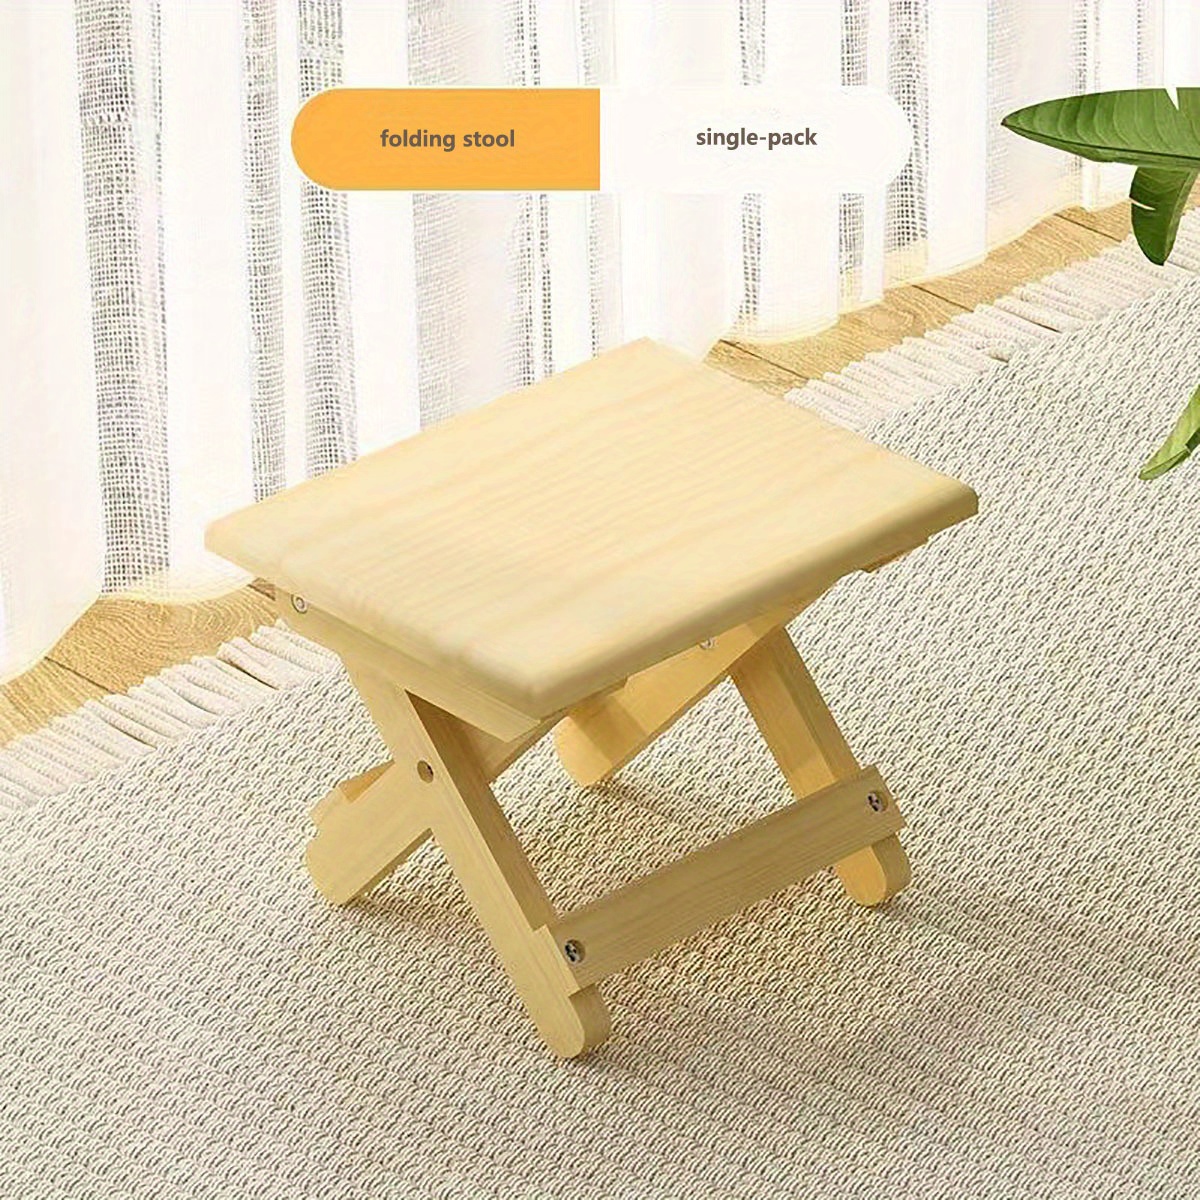 Wooden Folding Fishing Stool. French Rustic Camping Chair. Fisherman Gift.